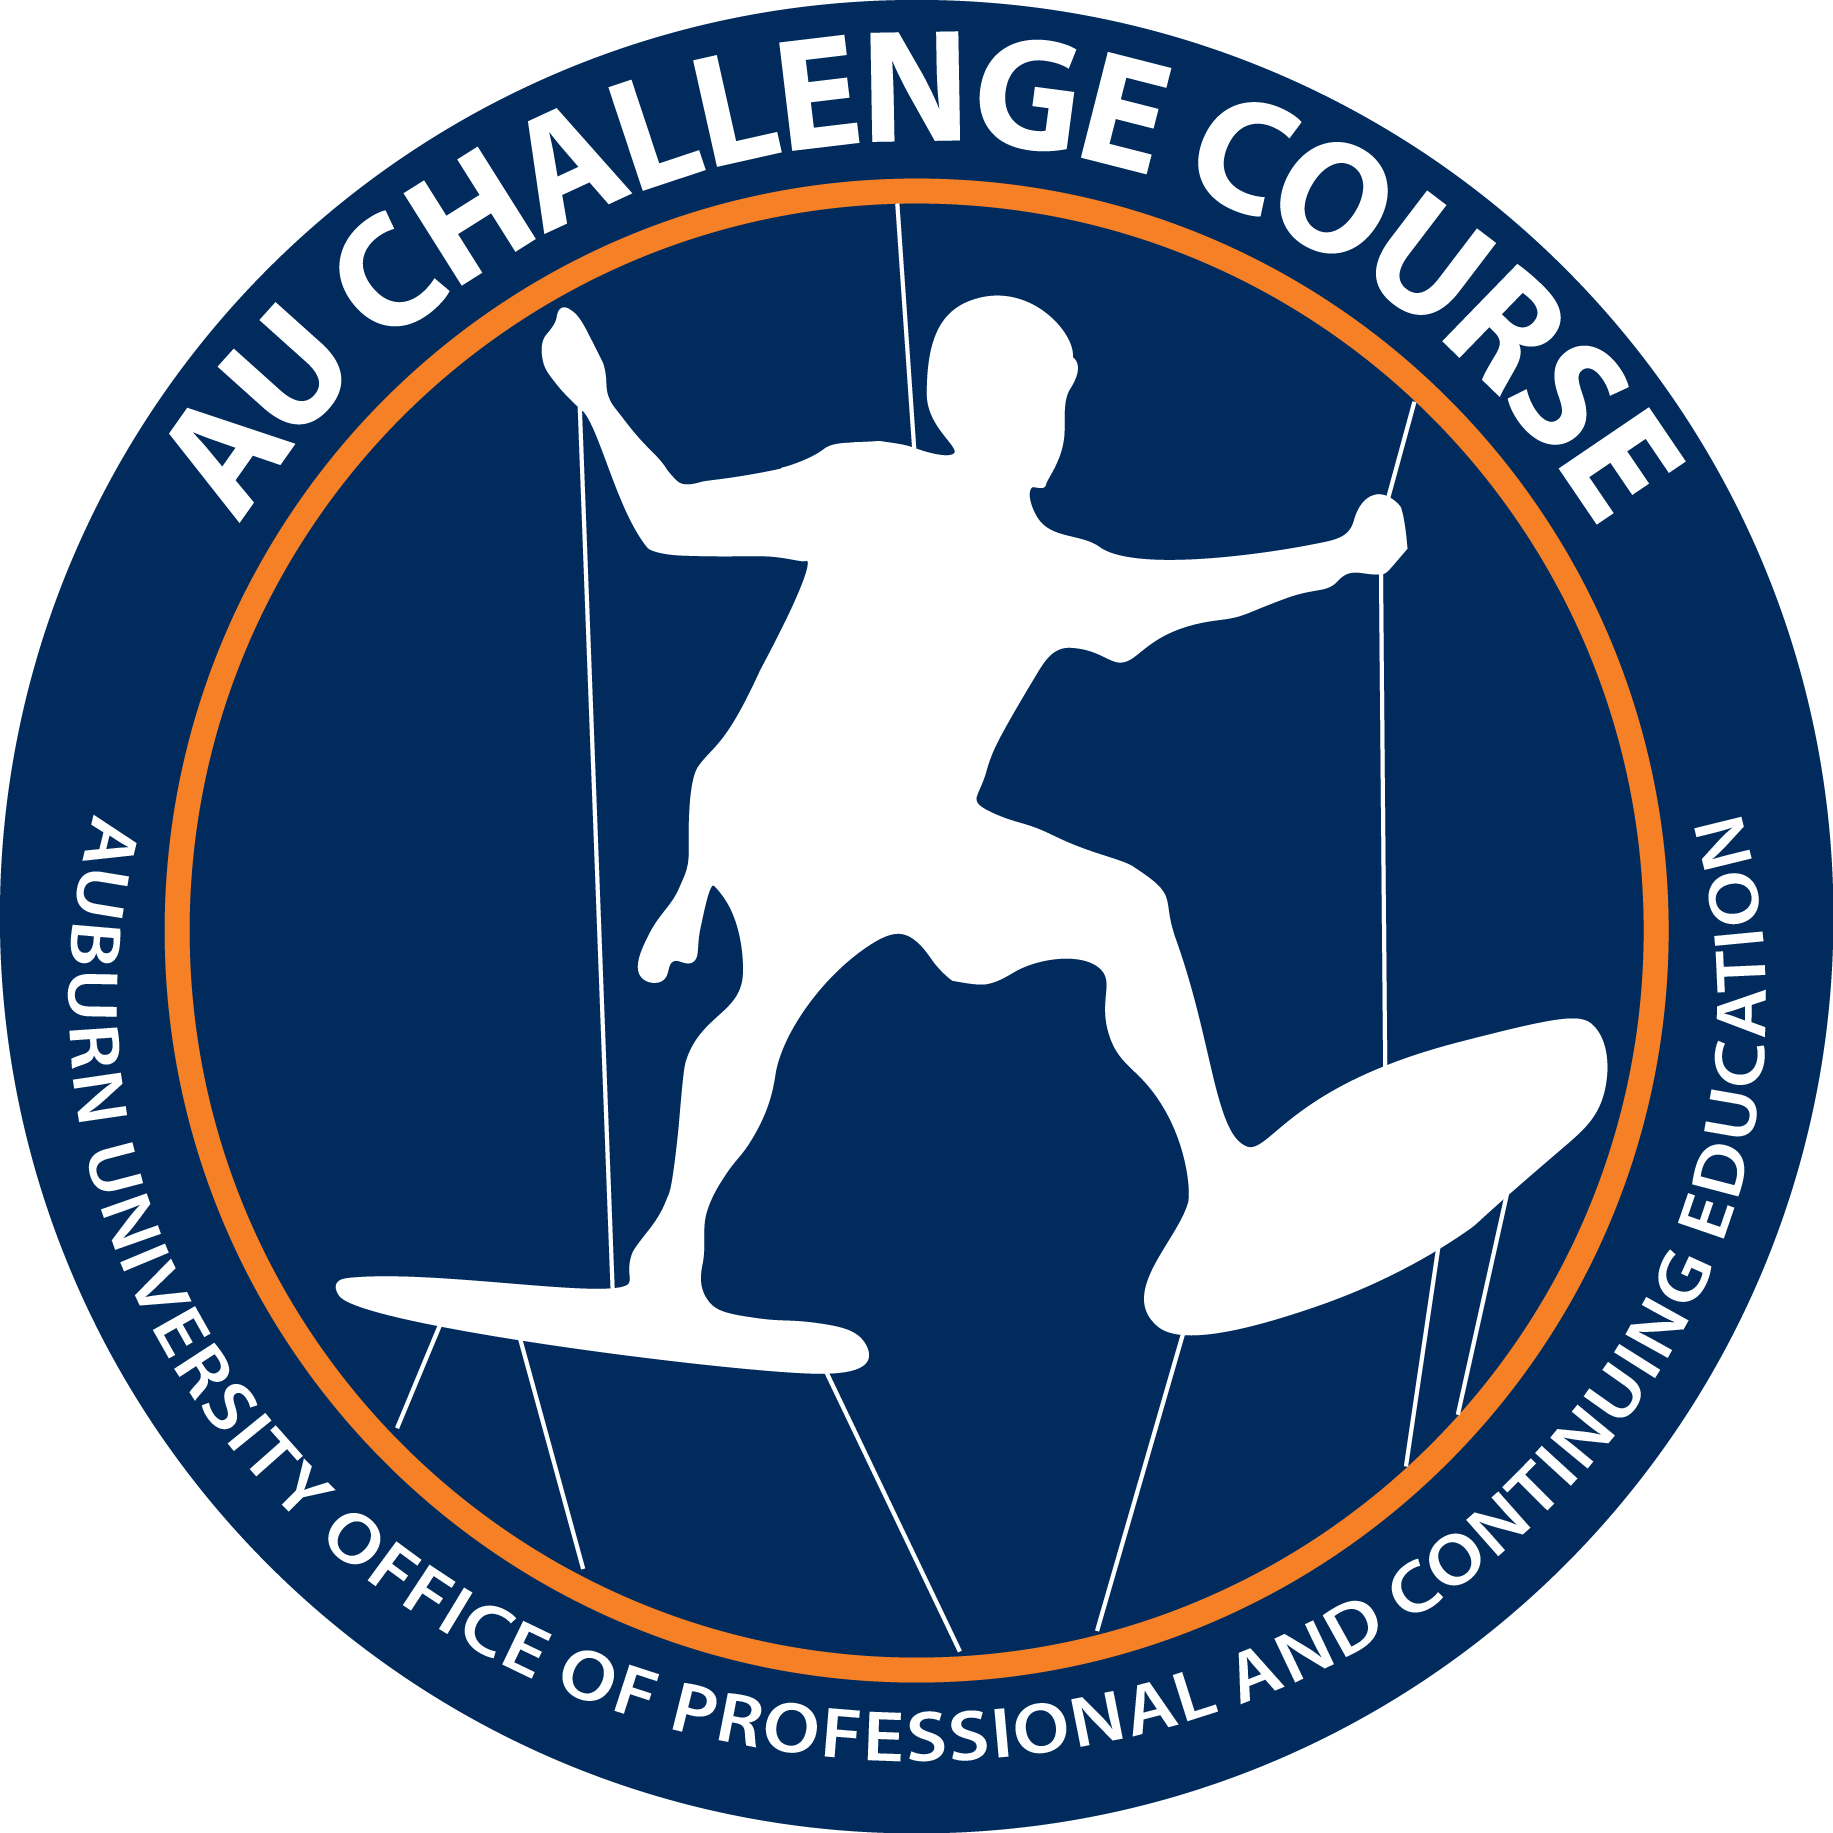 AU Challenge Course Office of Professional and Continuing Education